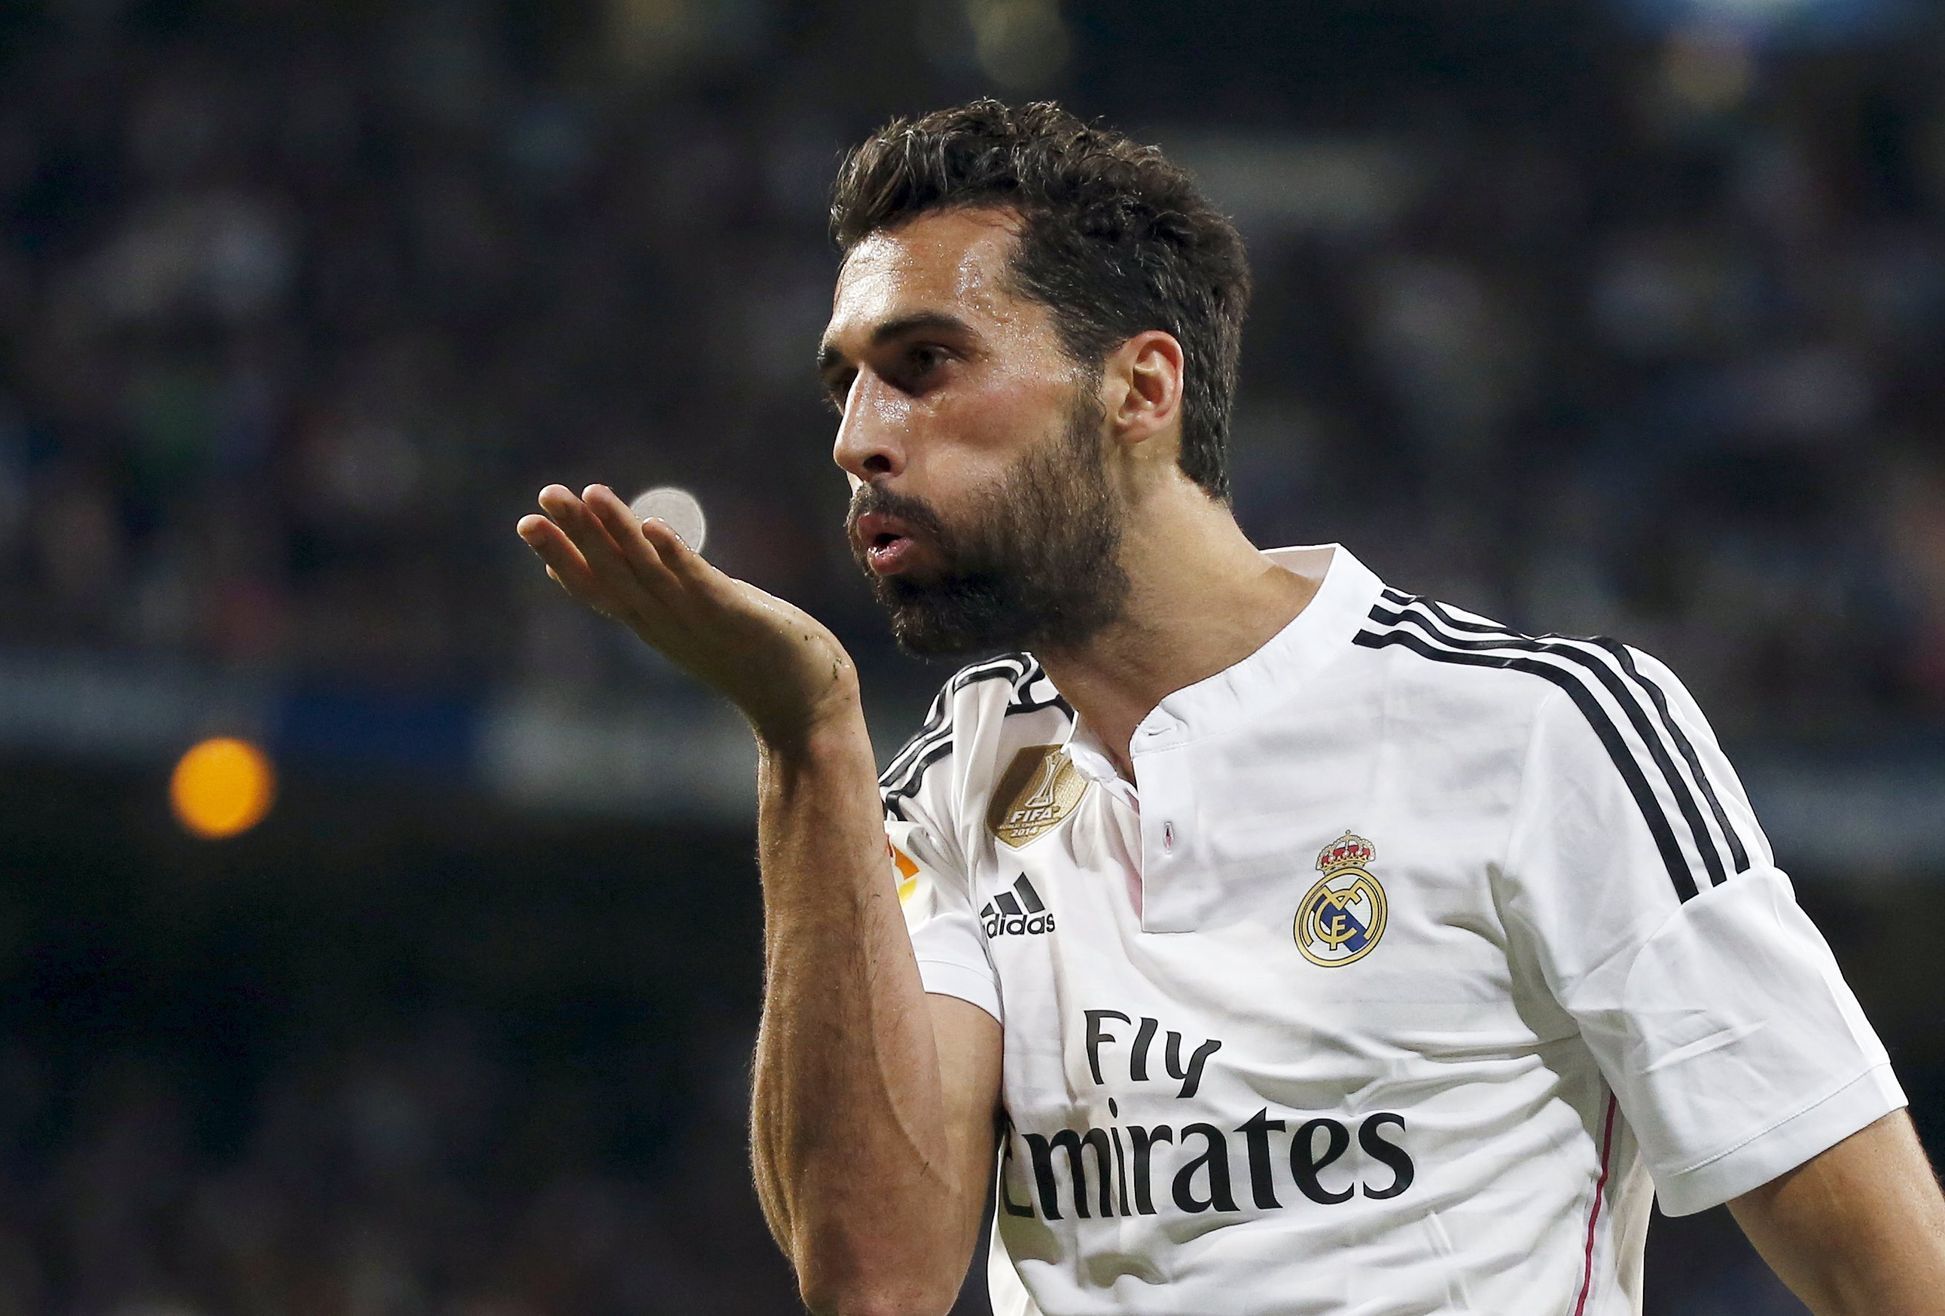 Real Madrid's Arbeloa blows a kiss as he celebrates after scoring a goal against Almeria in Madrid